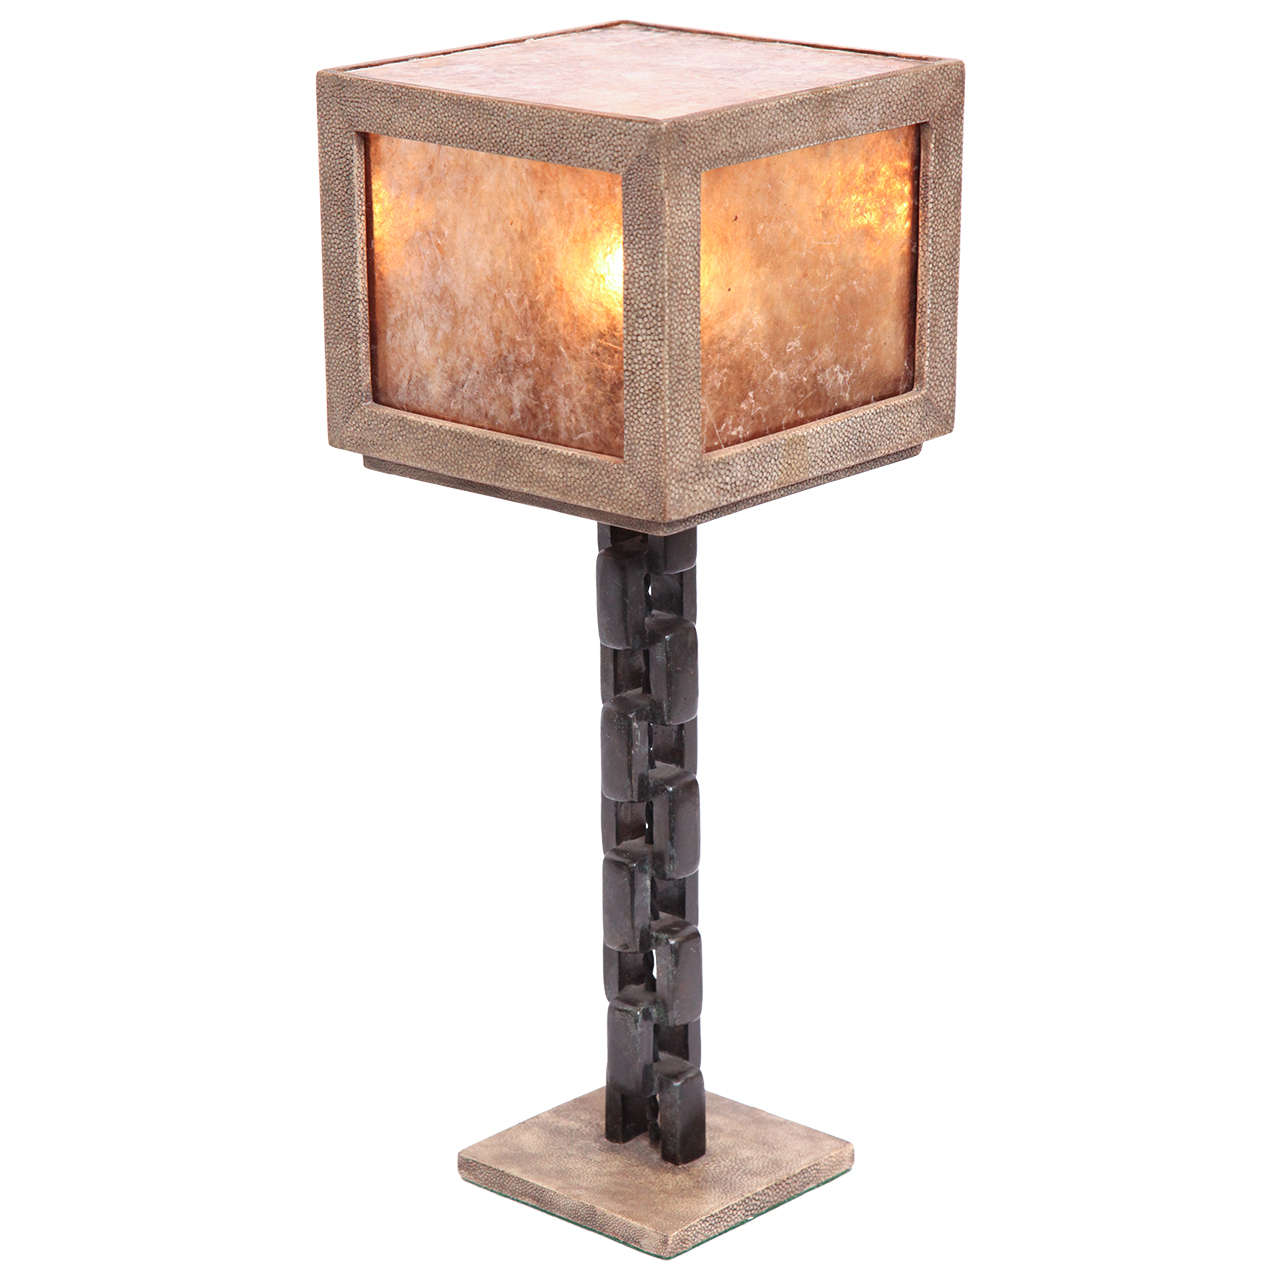 1980s French Modernist, Patinated Iron and Shagreen Table Lamp